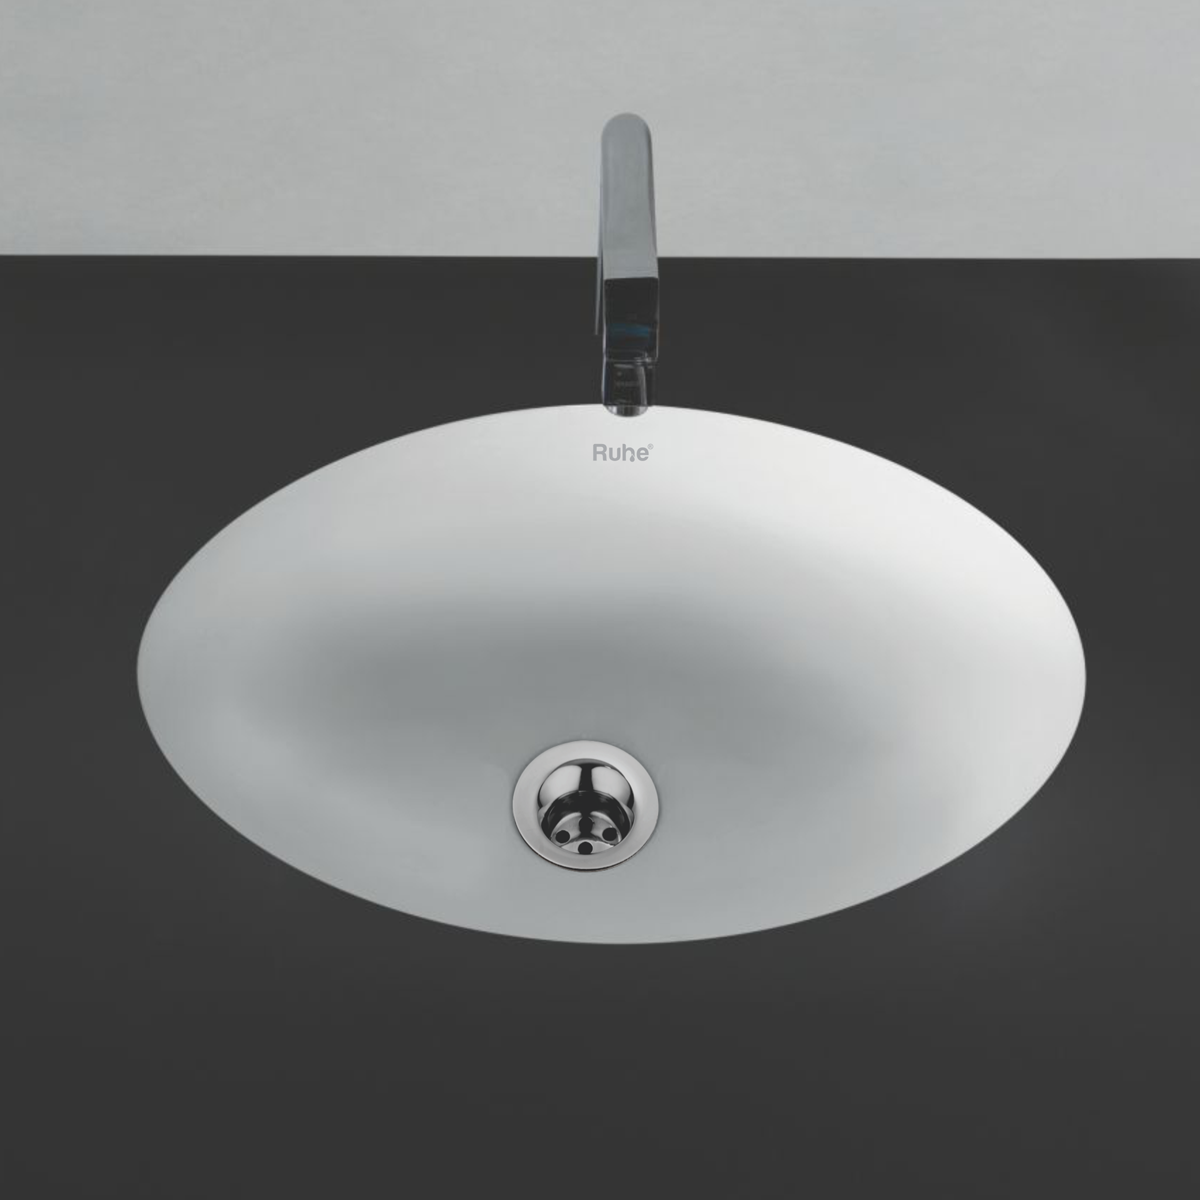 Simple Counter Wash Basin (White) - by Ruhe